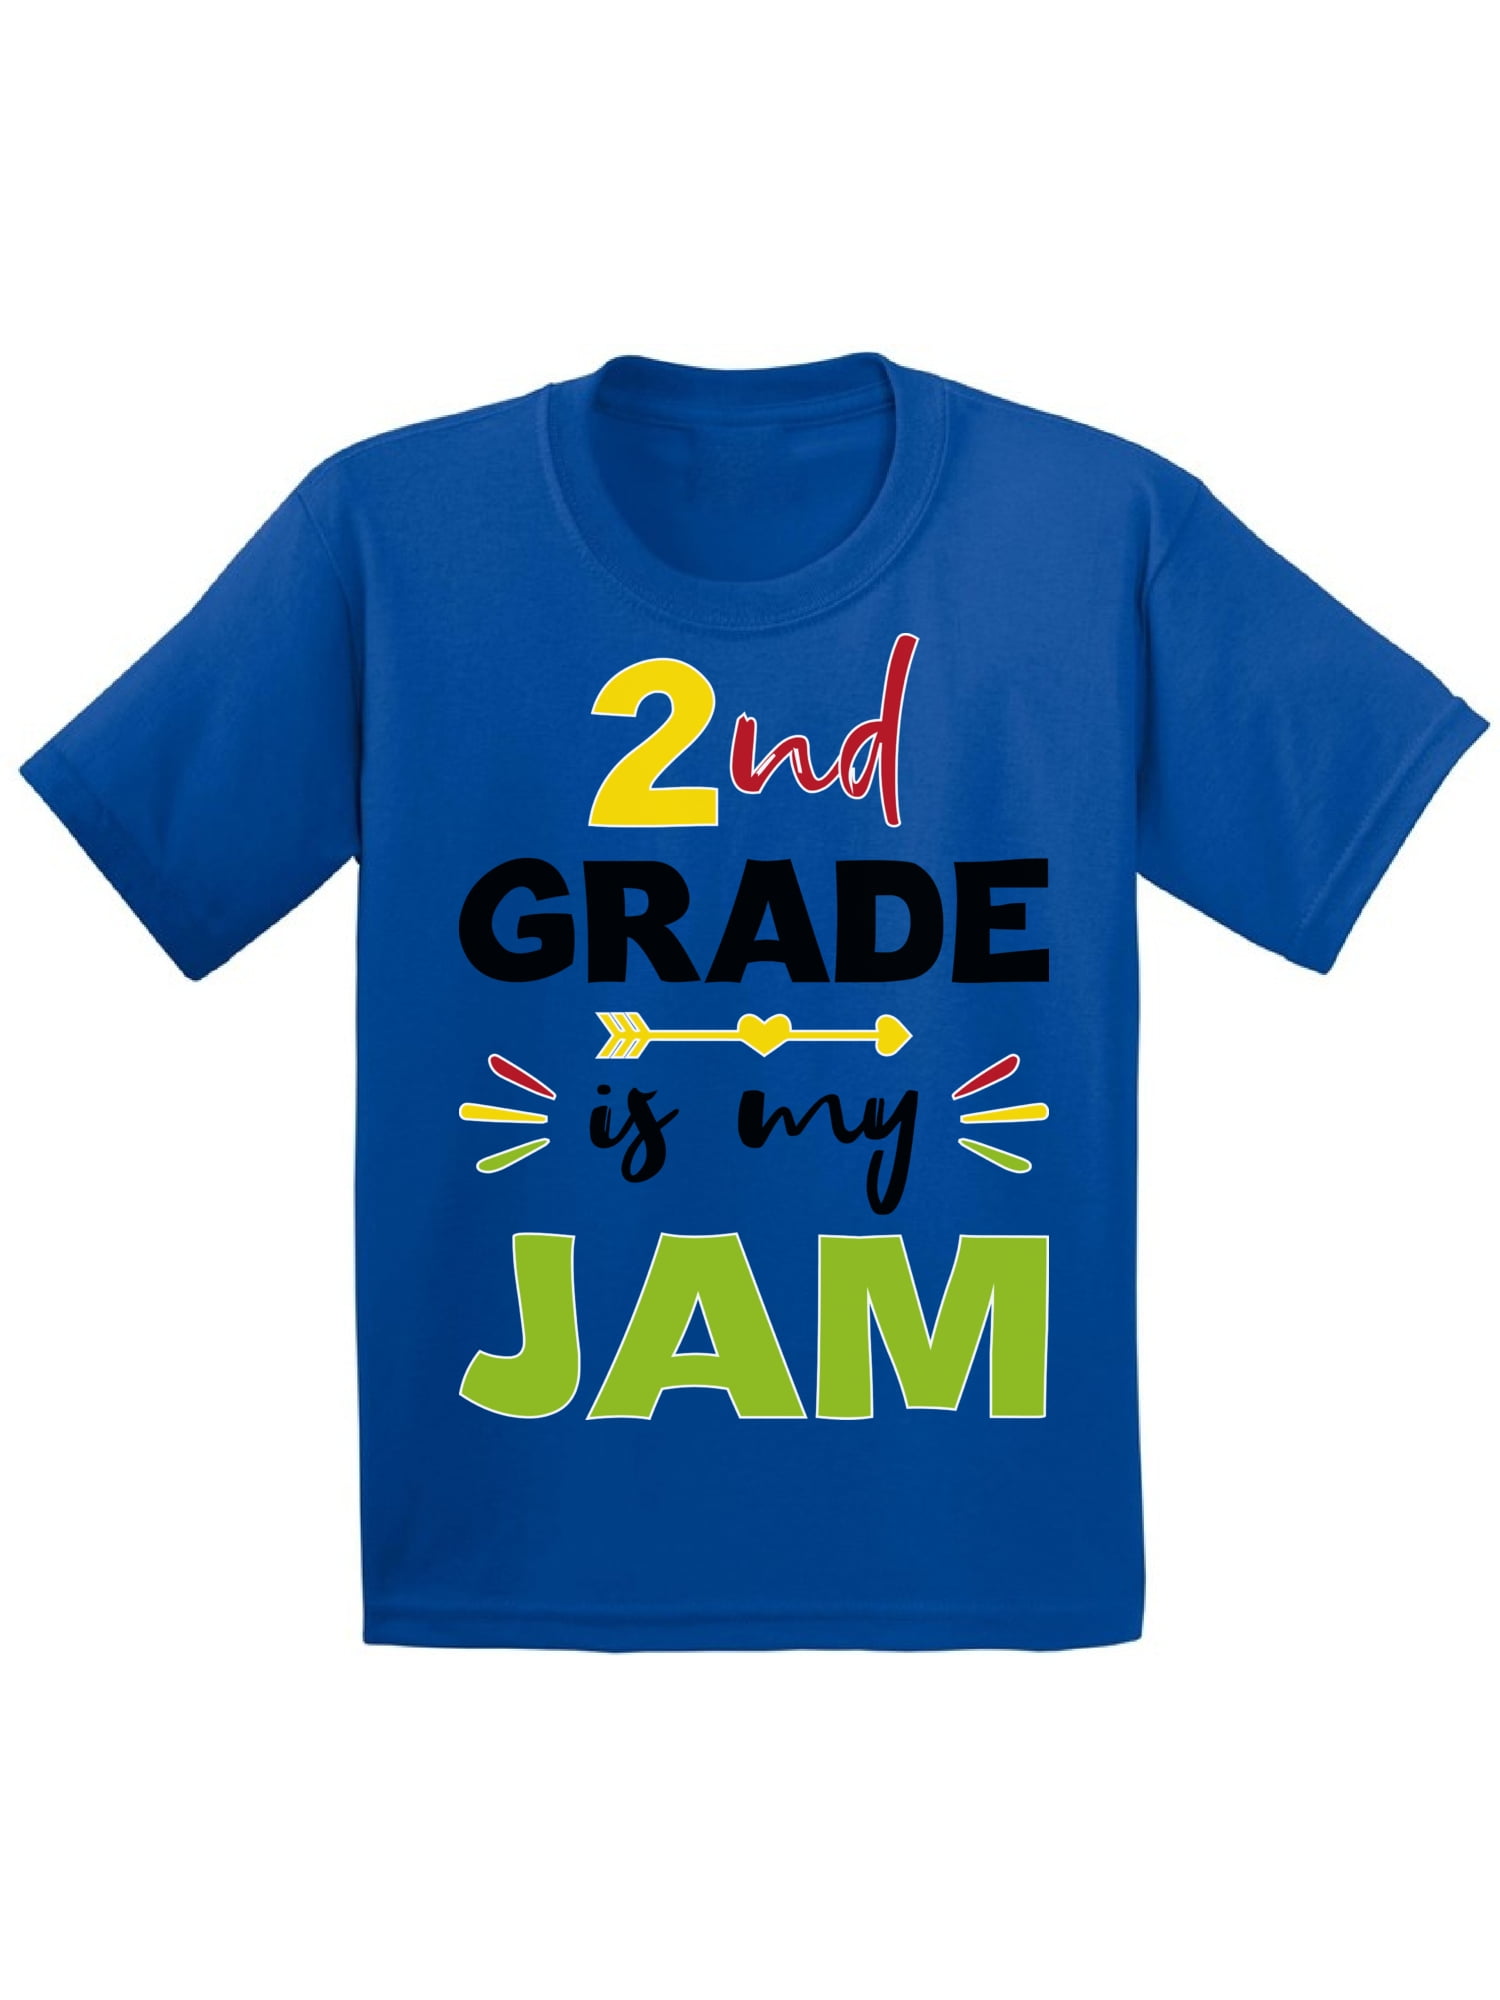 2nd Grader Youth Boy  Girl Shirt  Super Soft Kids Tee Back To School  First Day of School Tshirt for Second Grade 2nd Grade 2 Top